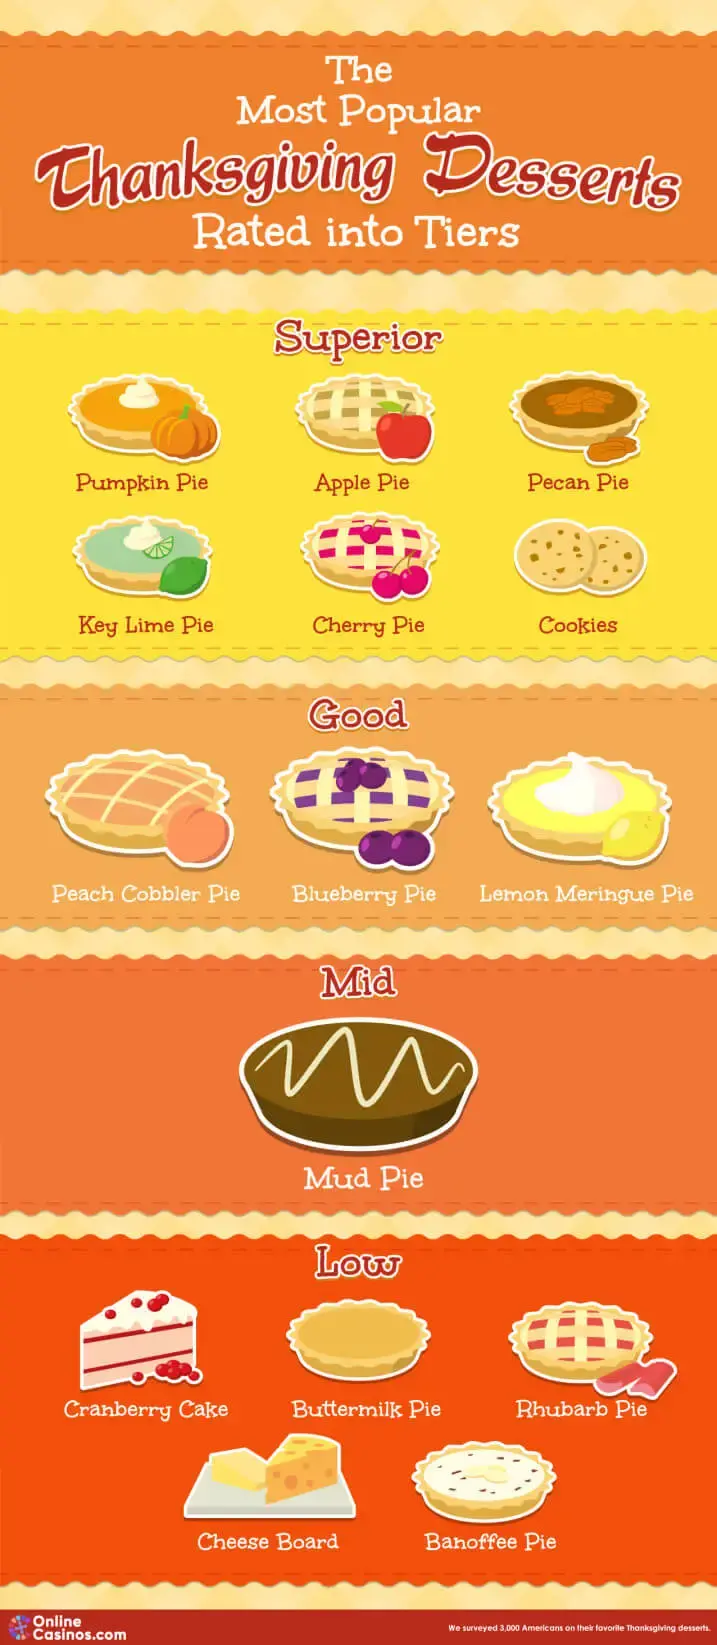 The Most Popular Thanksgiving Desserts Rated into Tiers